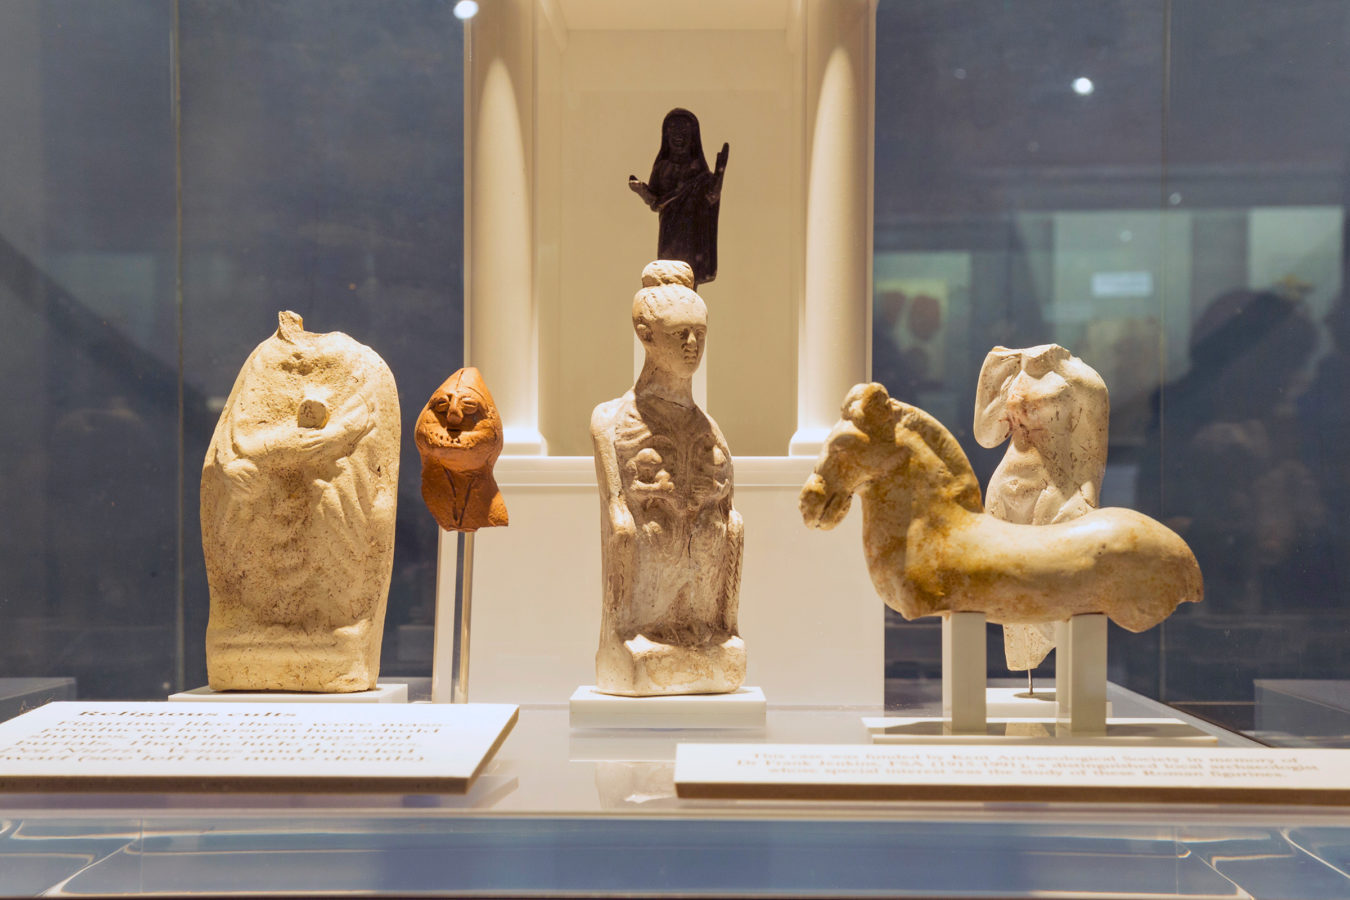 Roman artefacts on display in a cabinet